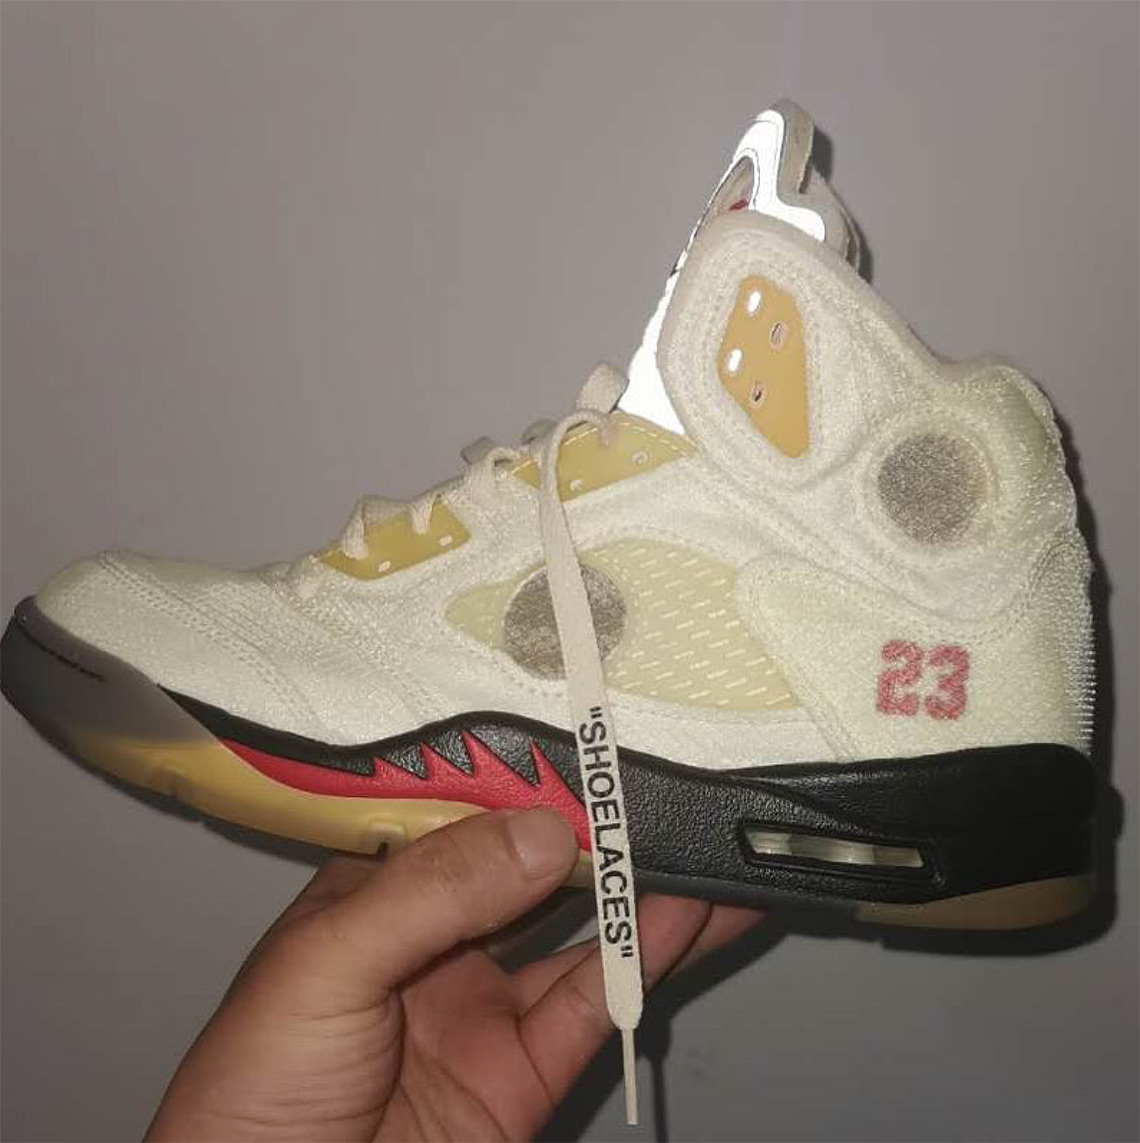 where are the off white jordan 5s dropping